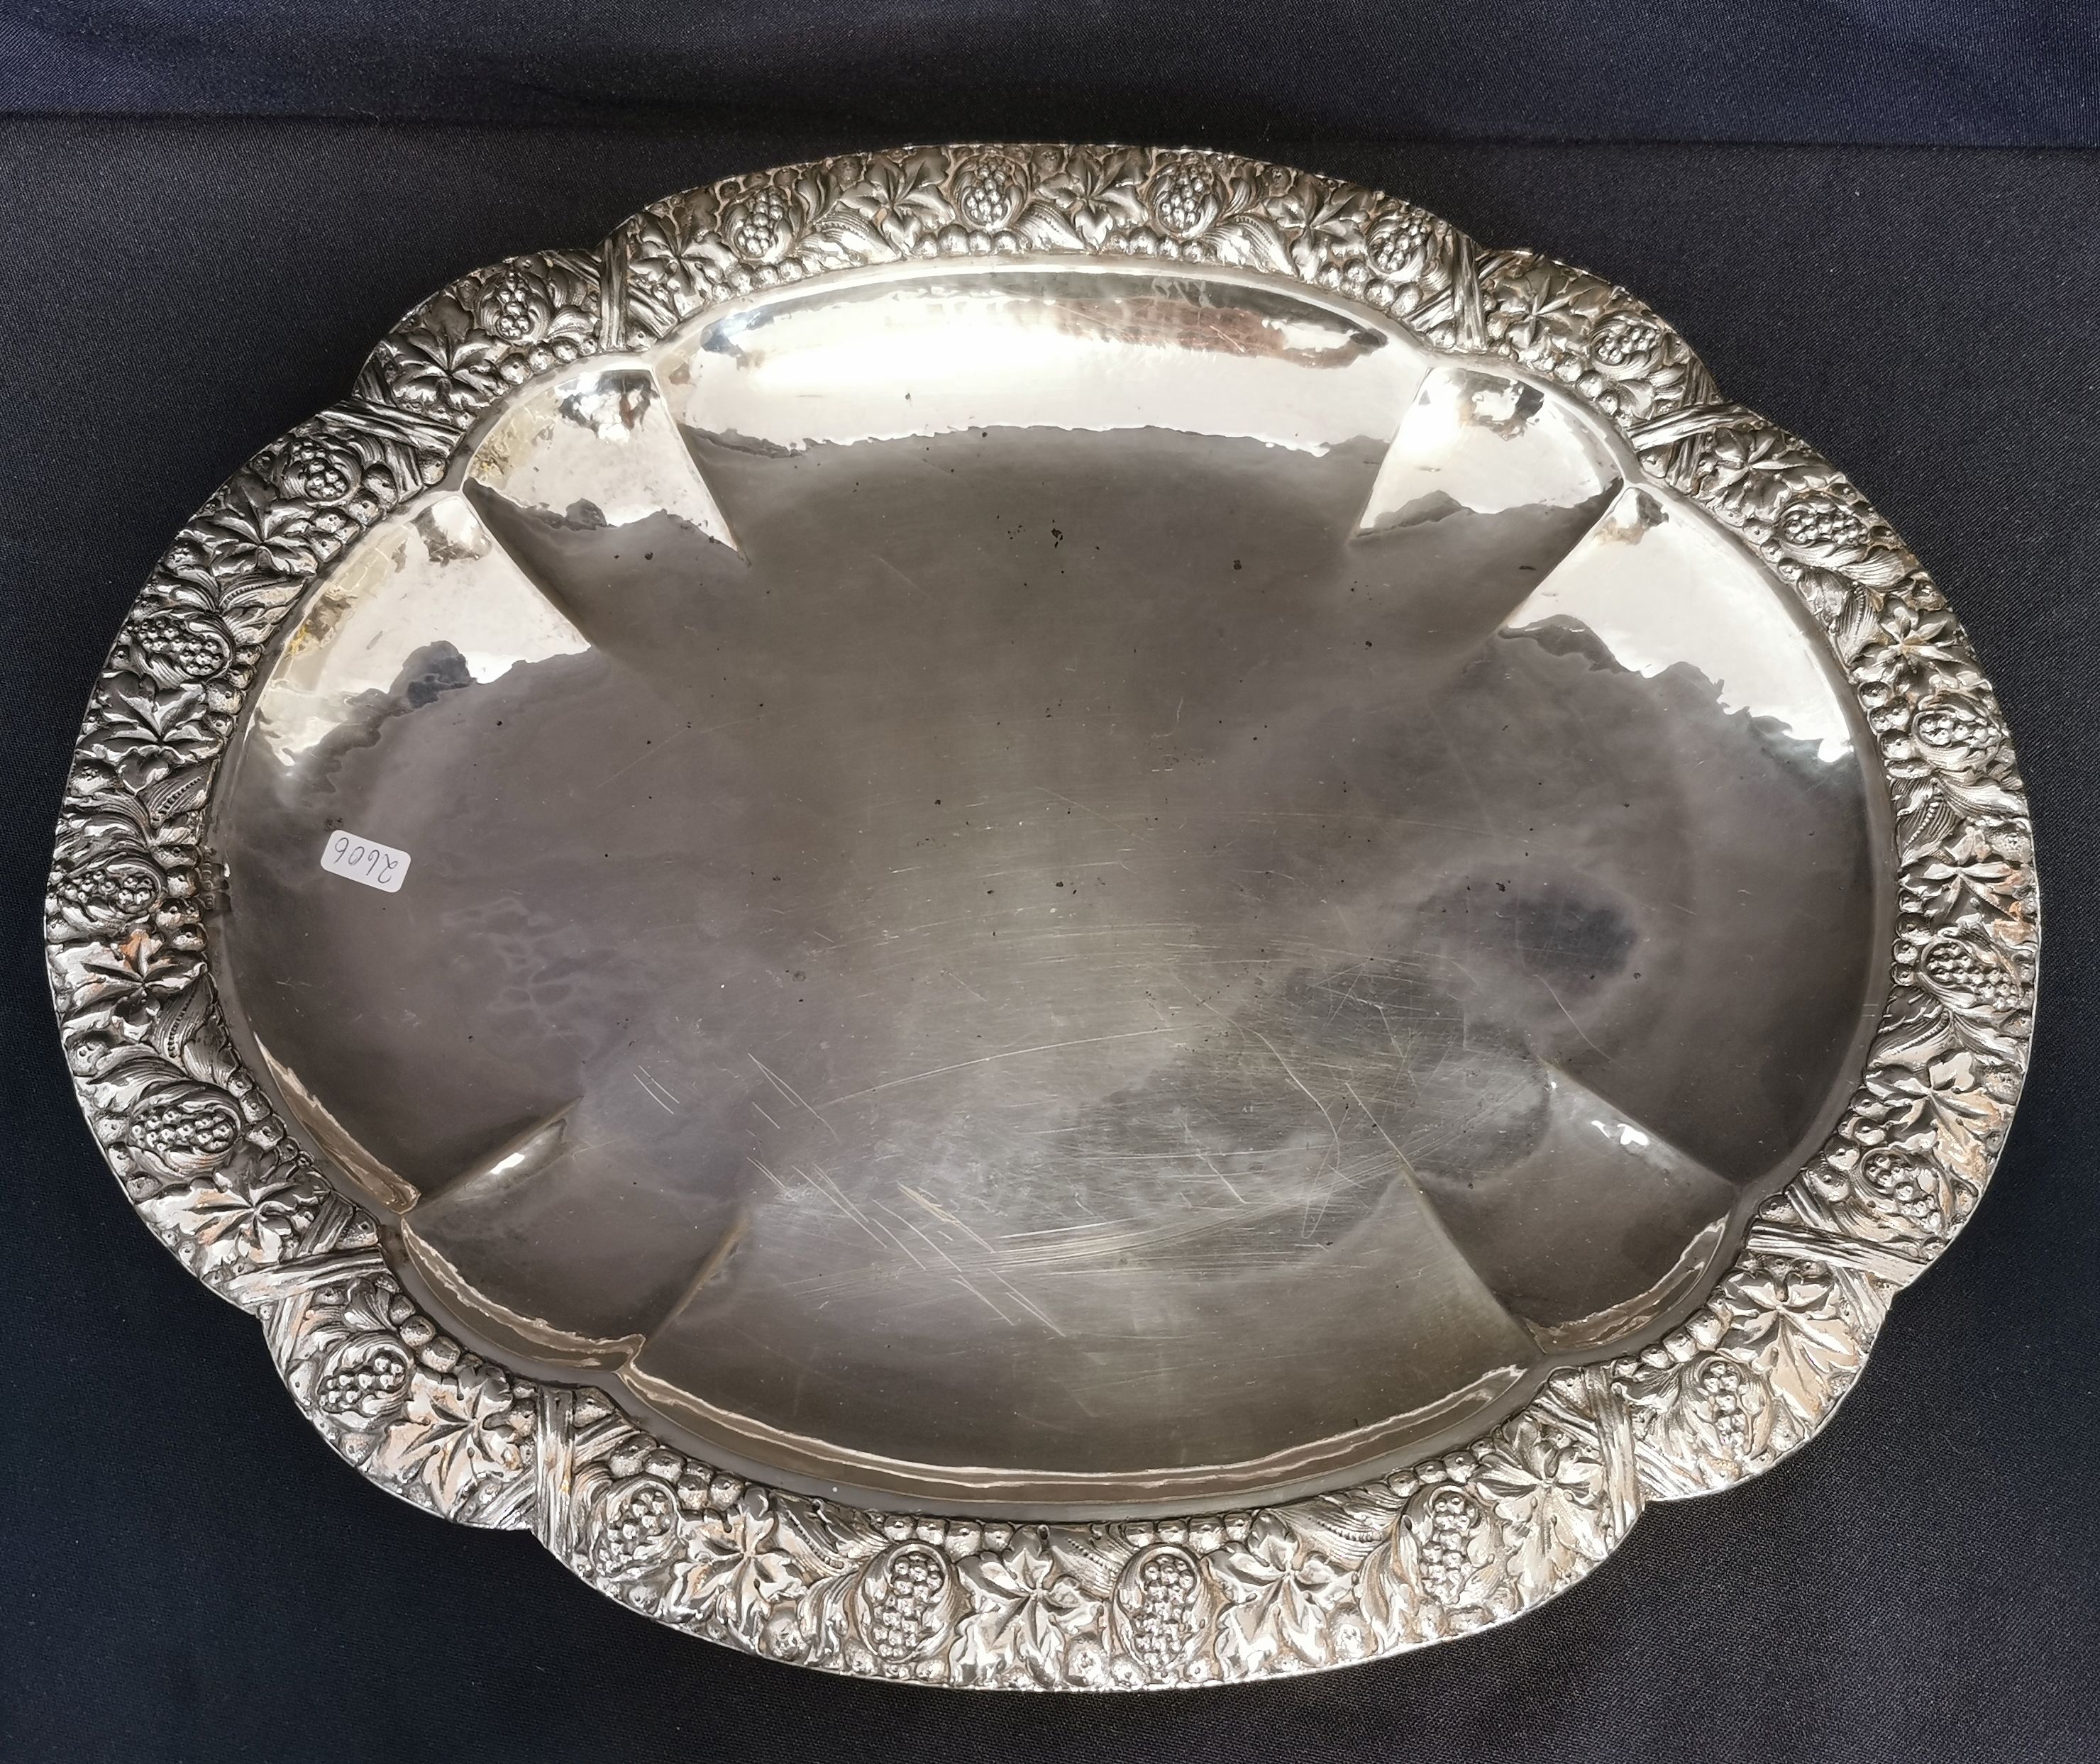 LARGE OVAL BOWL WITH RELIEF DECORATION  - Image 2 of 3